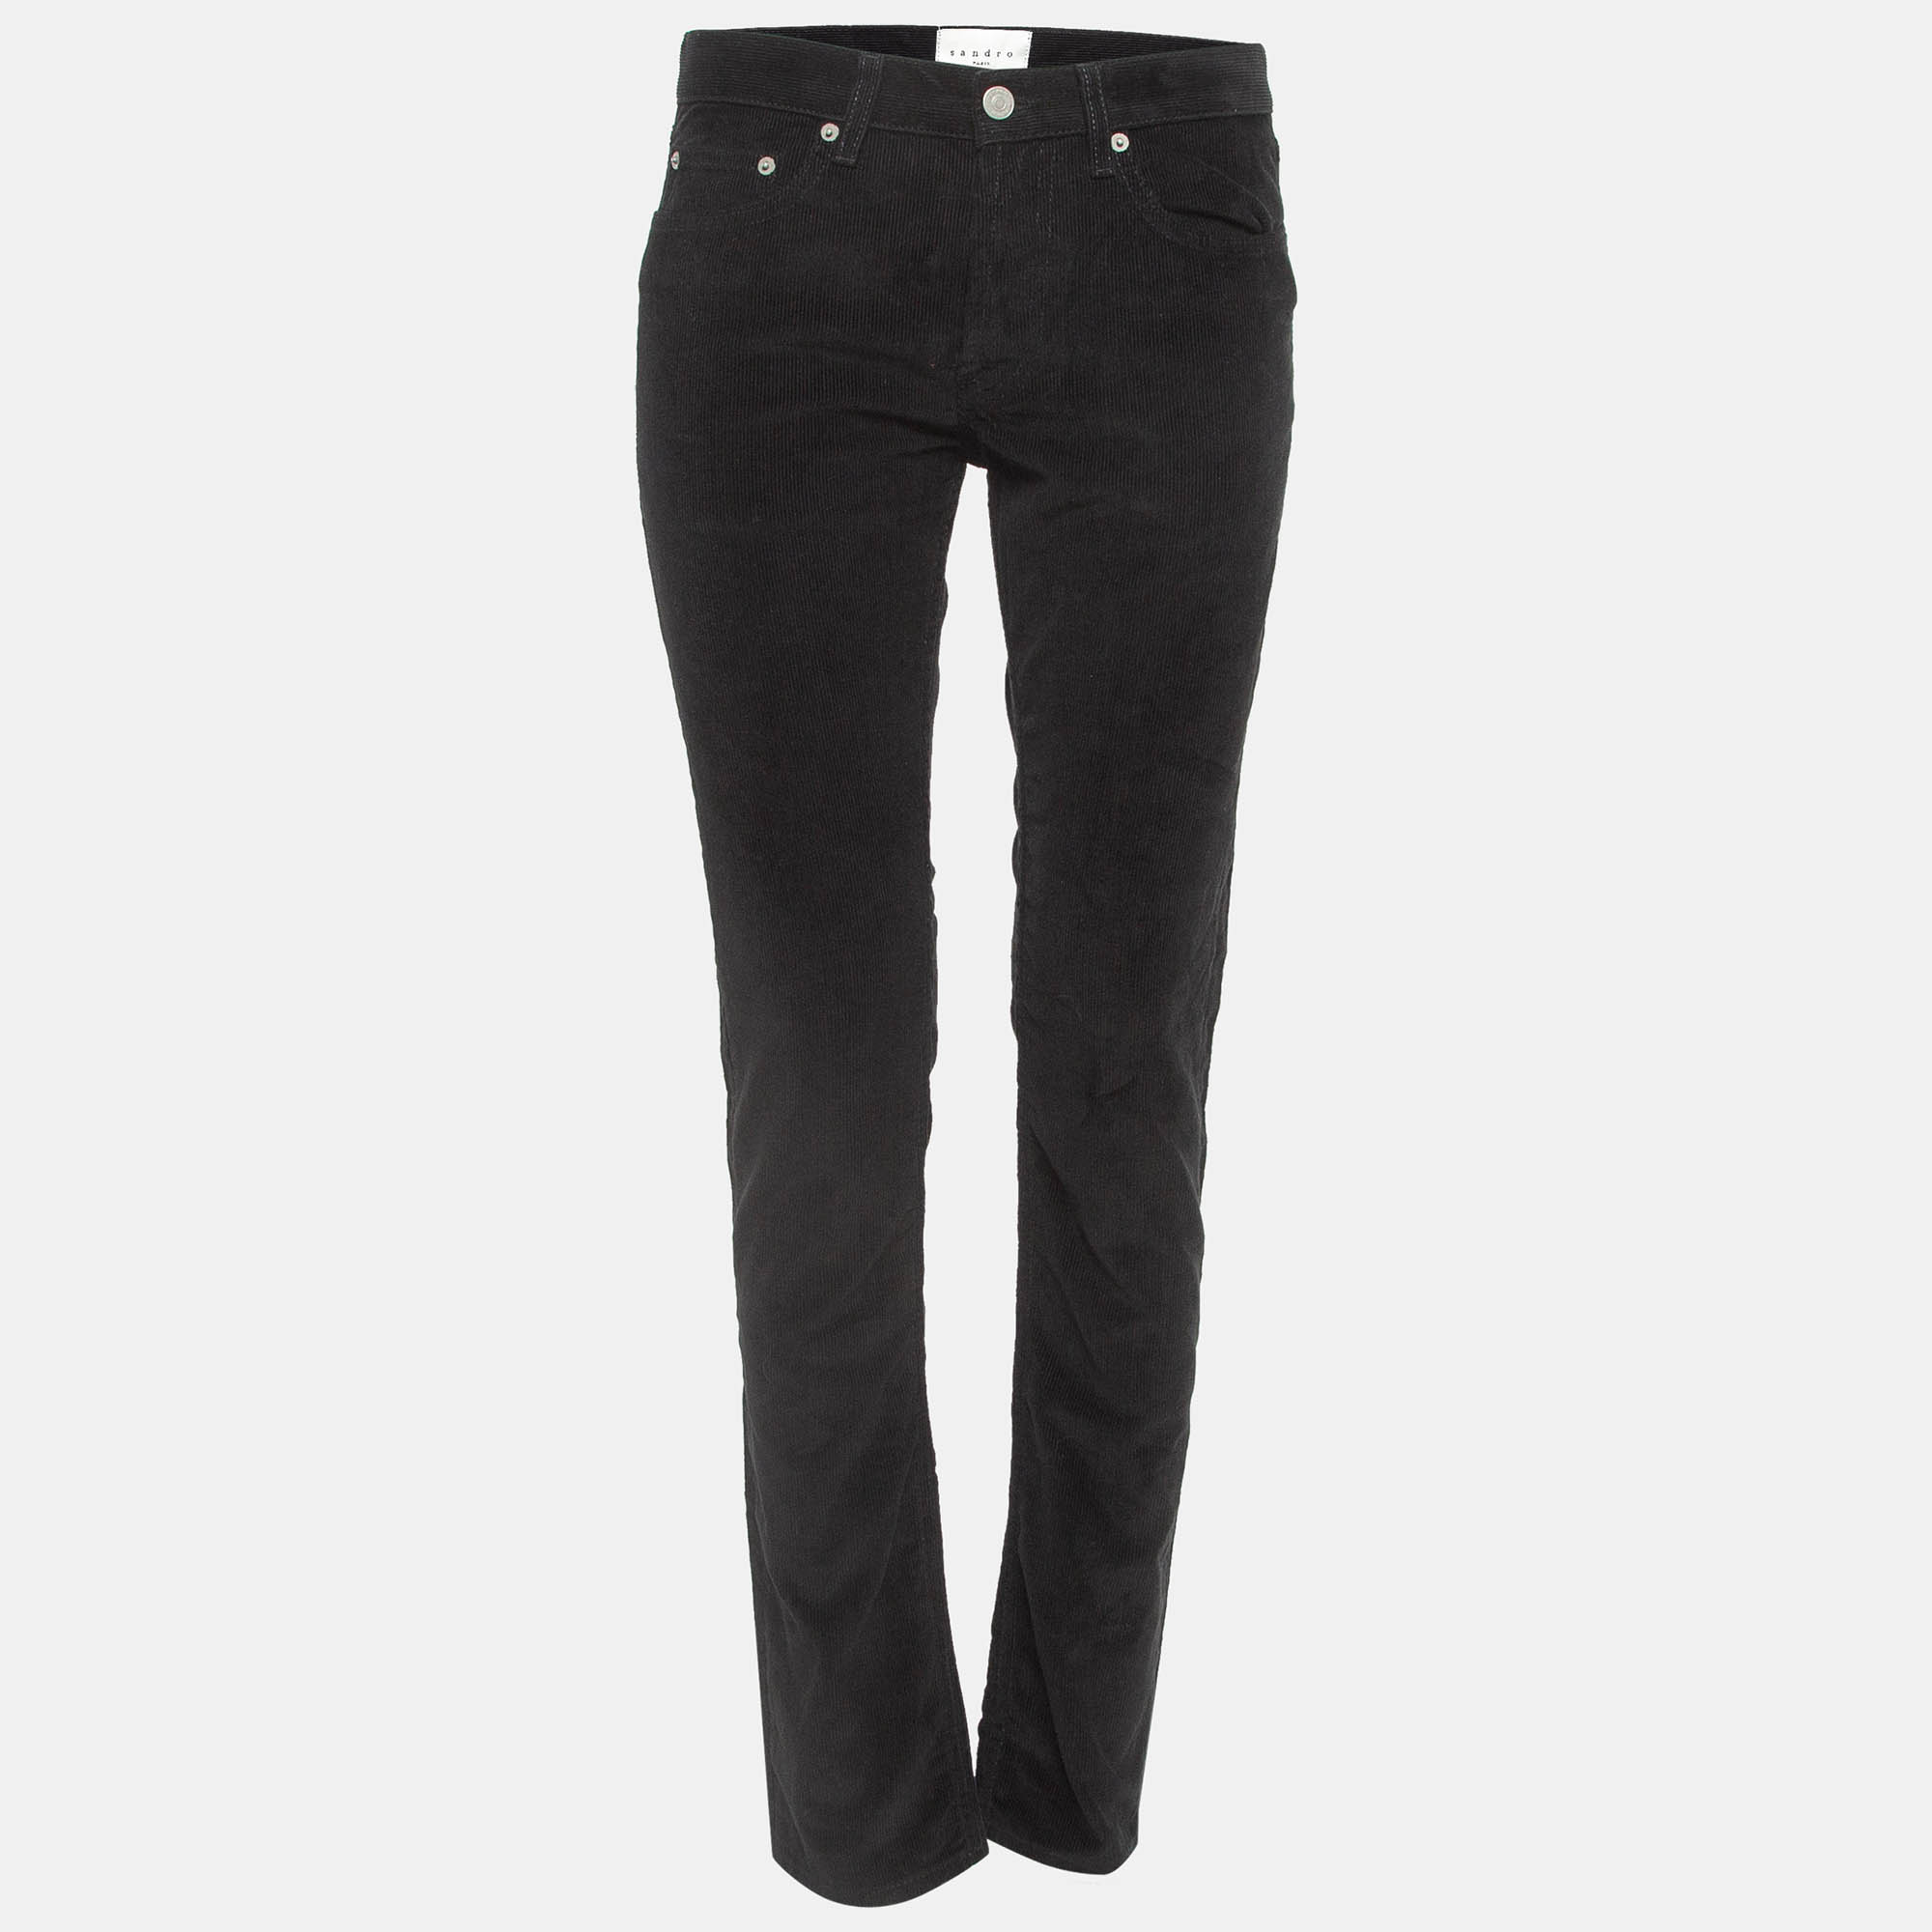 Pre-owned Sandro Black Corduroy Spector Trousers M Waist 29"